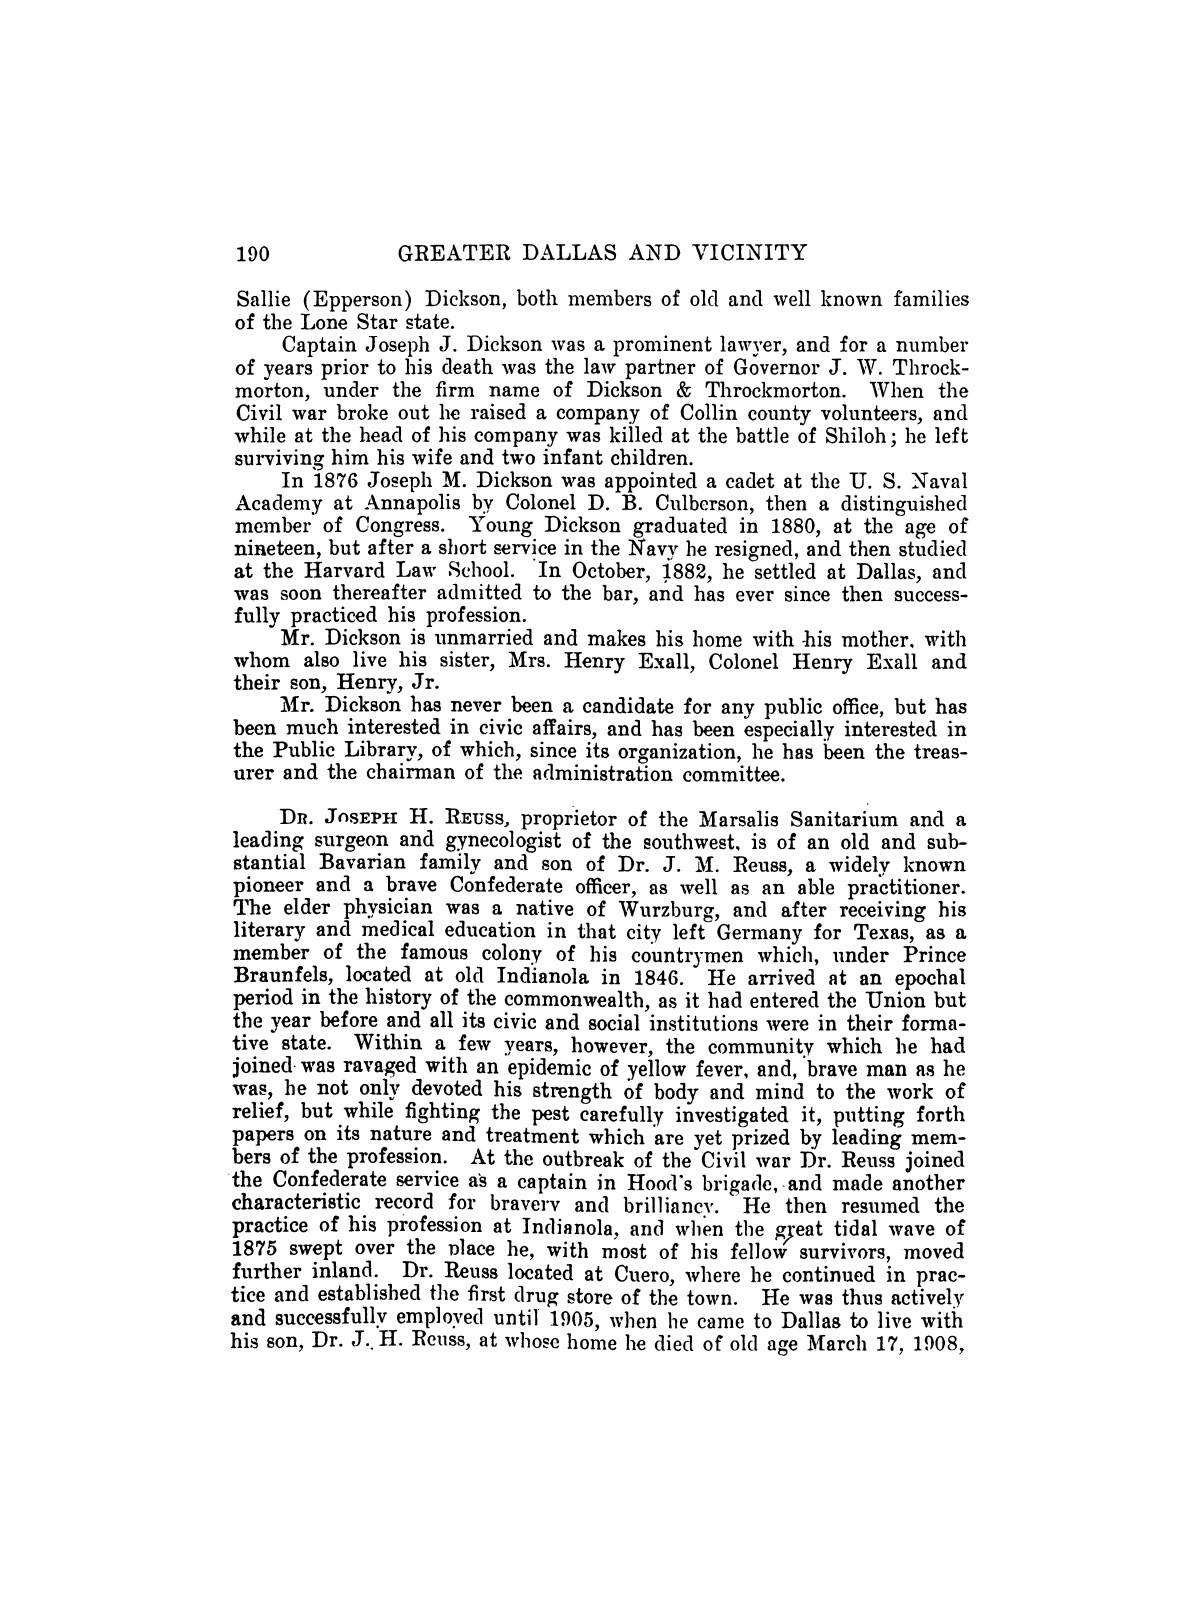 A History of Greater Dallas and Vicinity: Volume 2
                                                
                                                    [Sequence #]: 212 of 485
                                                